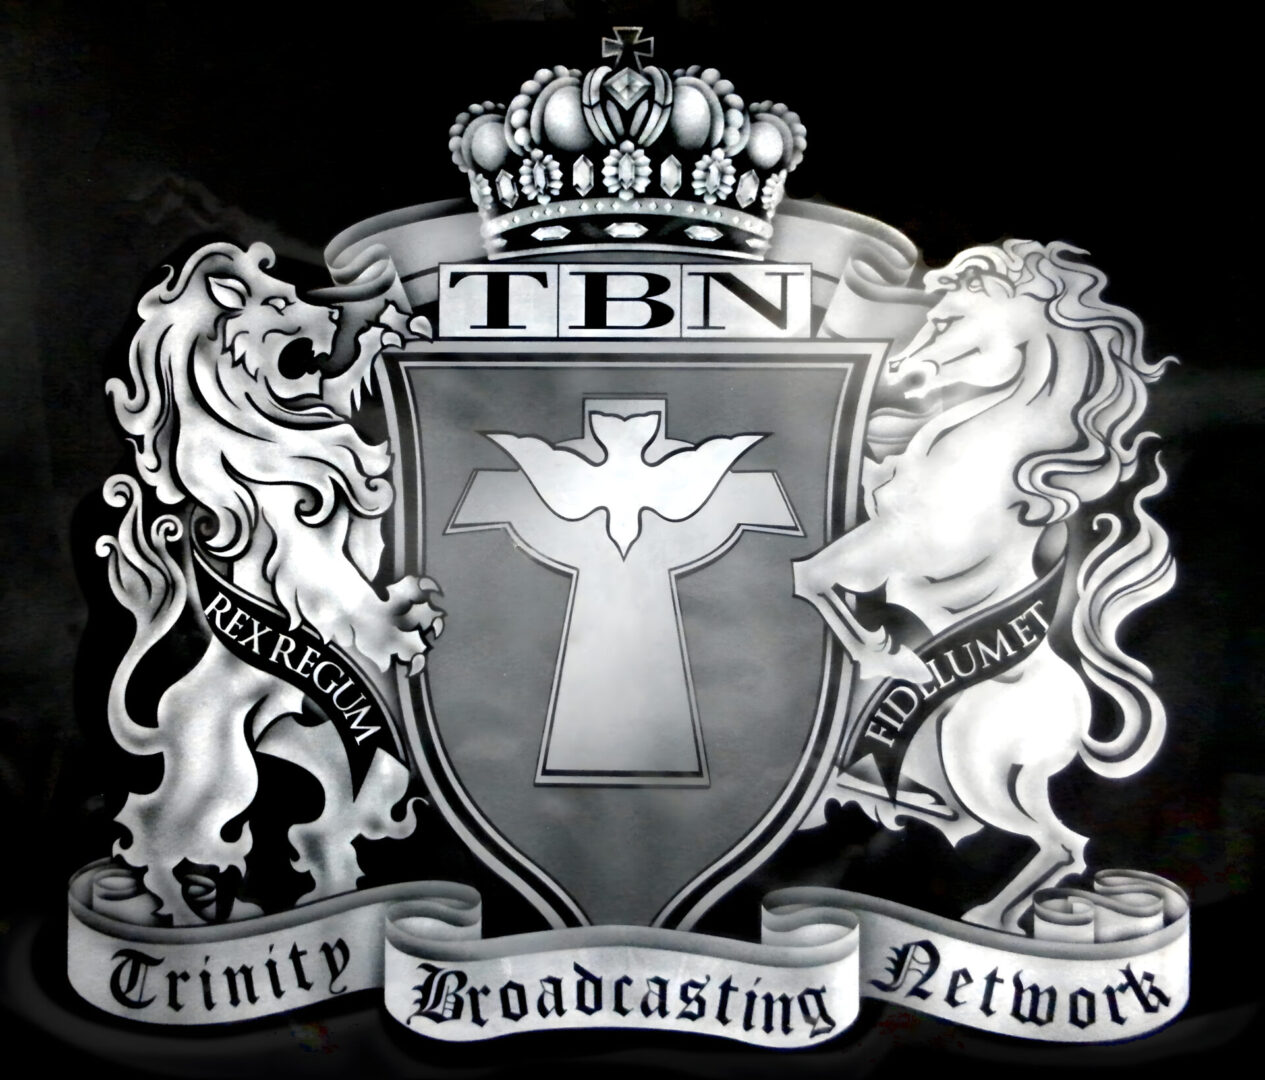 Emblem of trinity broadcasting network featuring a crowned shield with a cross, flanked by two lions and inscribed ribbons.